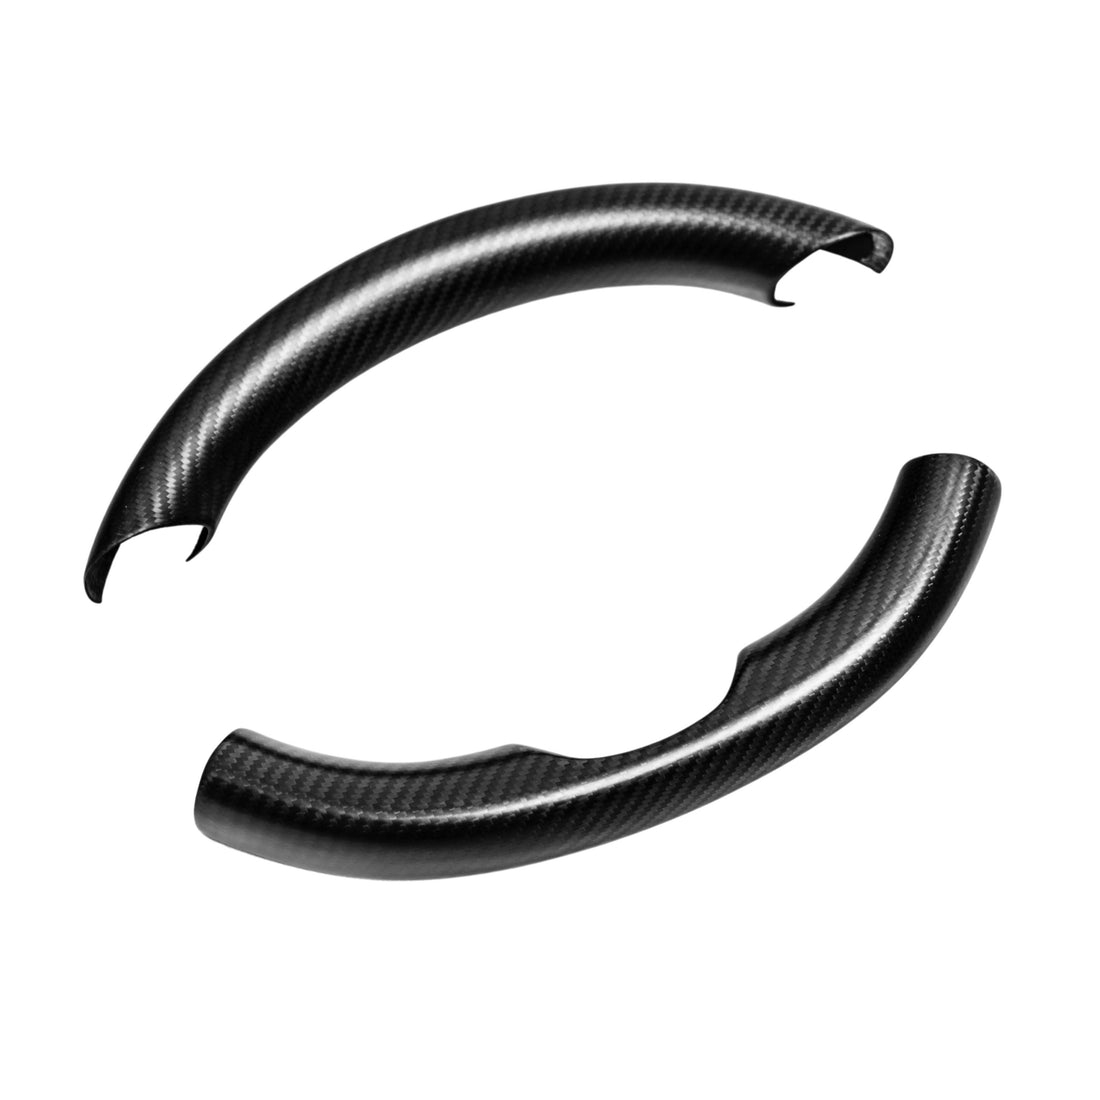 Upper / Lower Parts Steering Wheel Accessories for Tesla Model 3 / Y - Carbon Fiber Interior Mods - Tesery Official Store